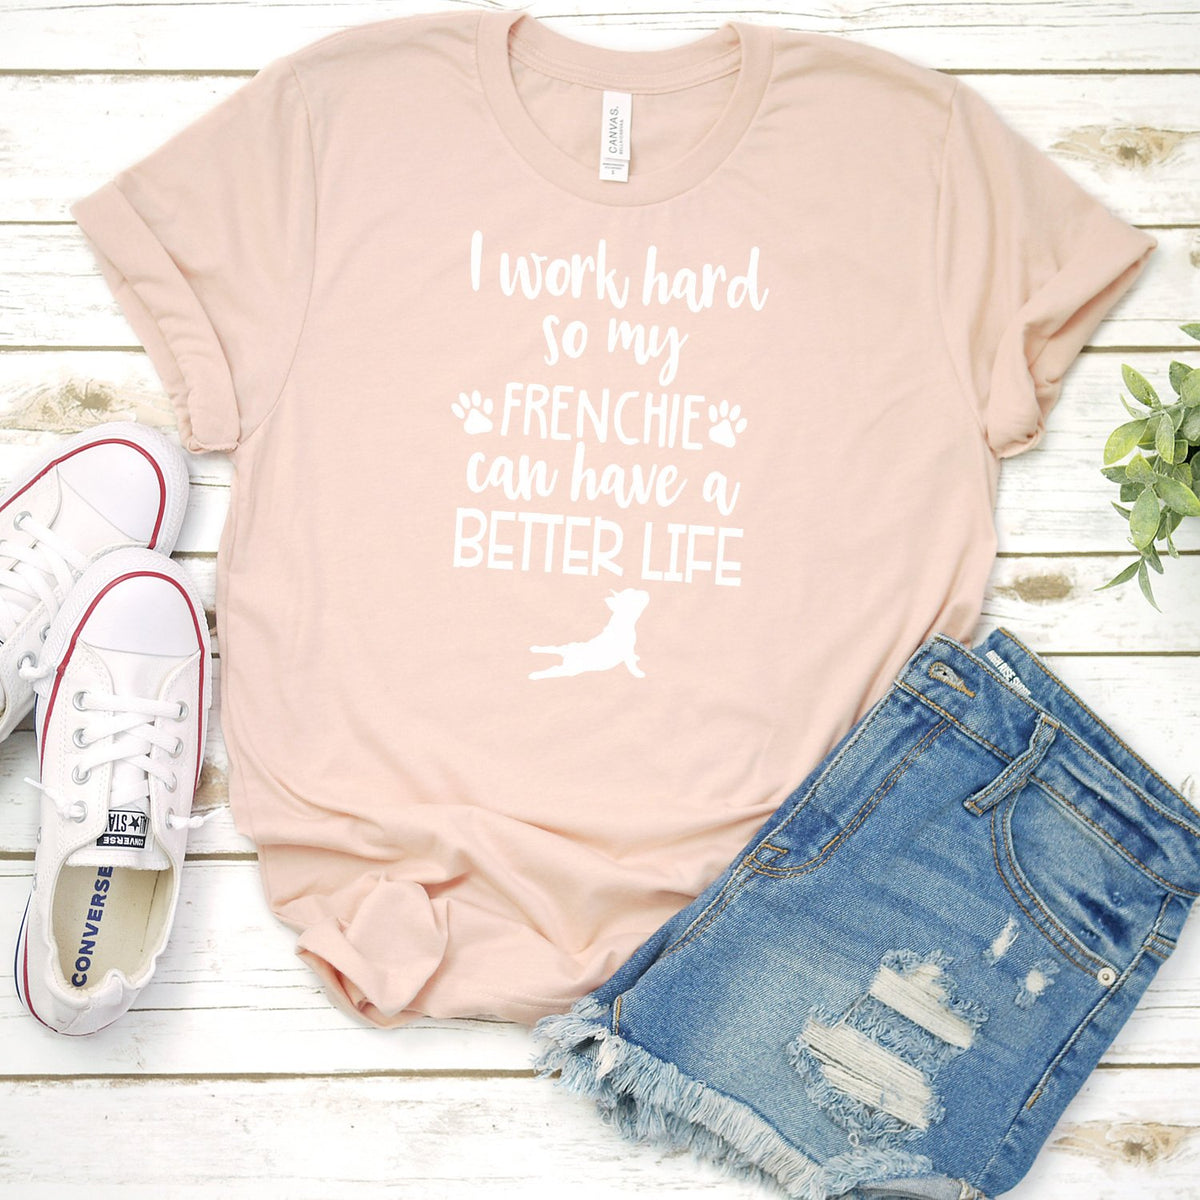 I Work Hard So My Frenchie Can Have A Better Life - Short Sleeve Tee Shirt